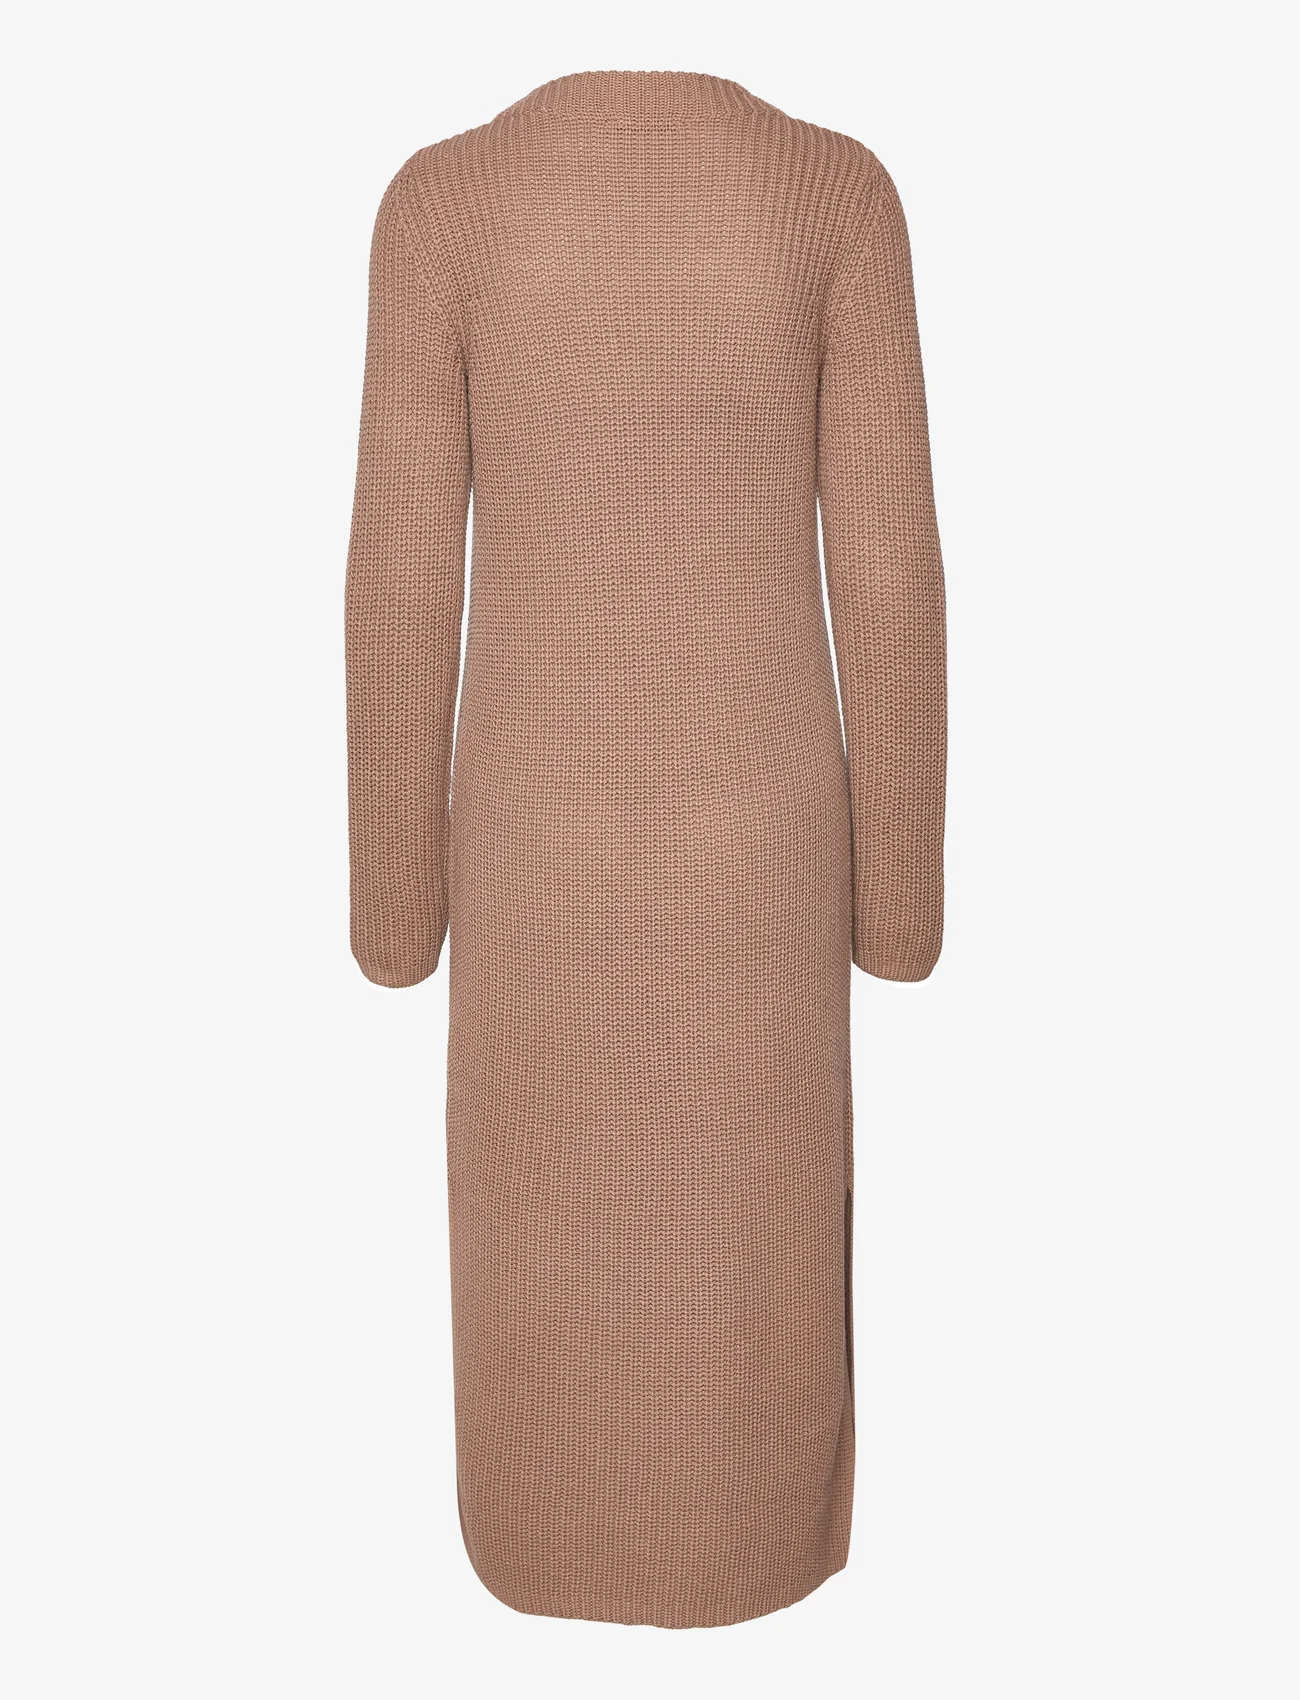 Esprit Casual - Knitted dress - neulemekot - taupe 5 - 1